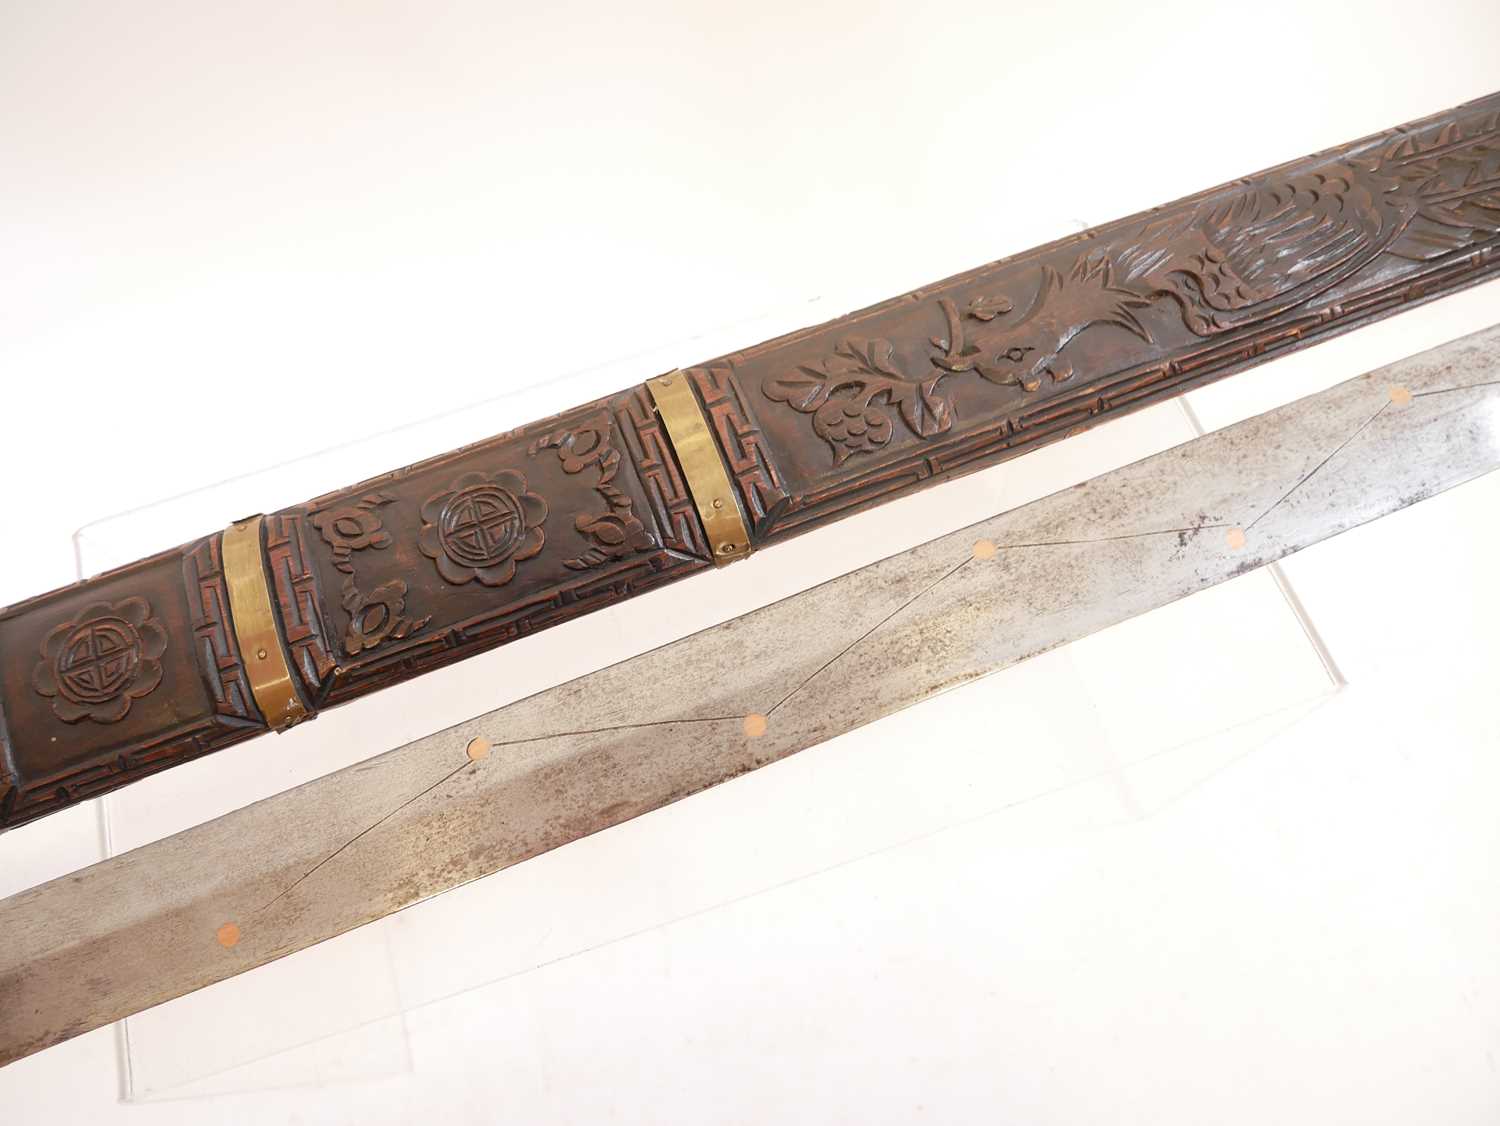 Chinese double edged sword, with copper studded blade, brass guard and carved grip and scabbard. - Image 4 of 7